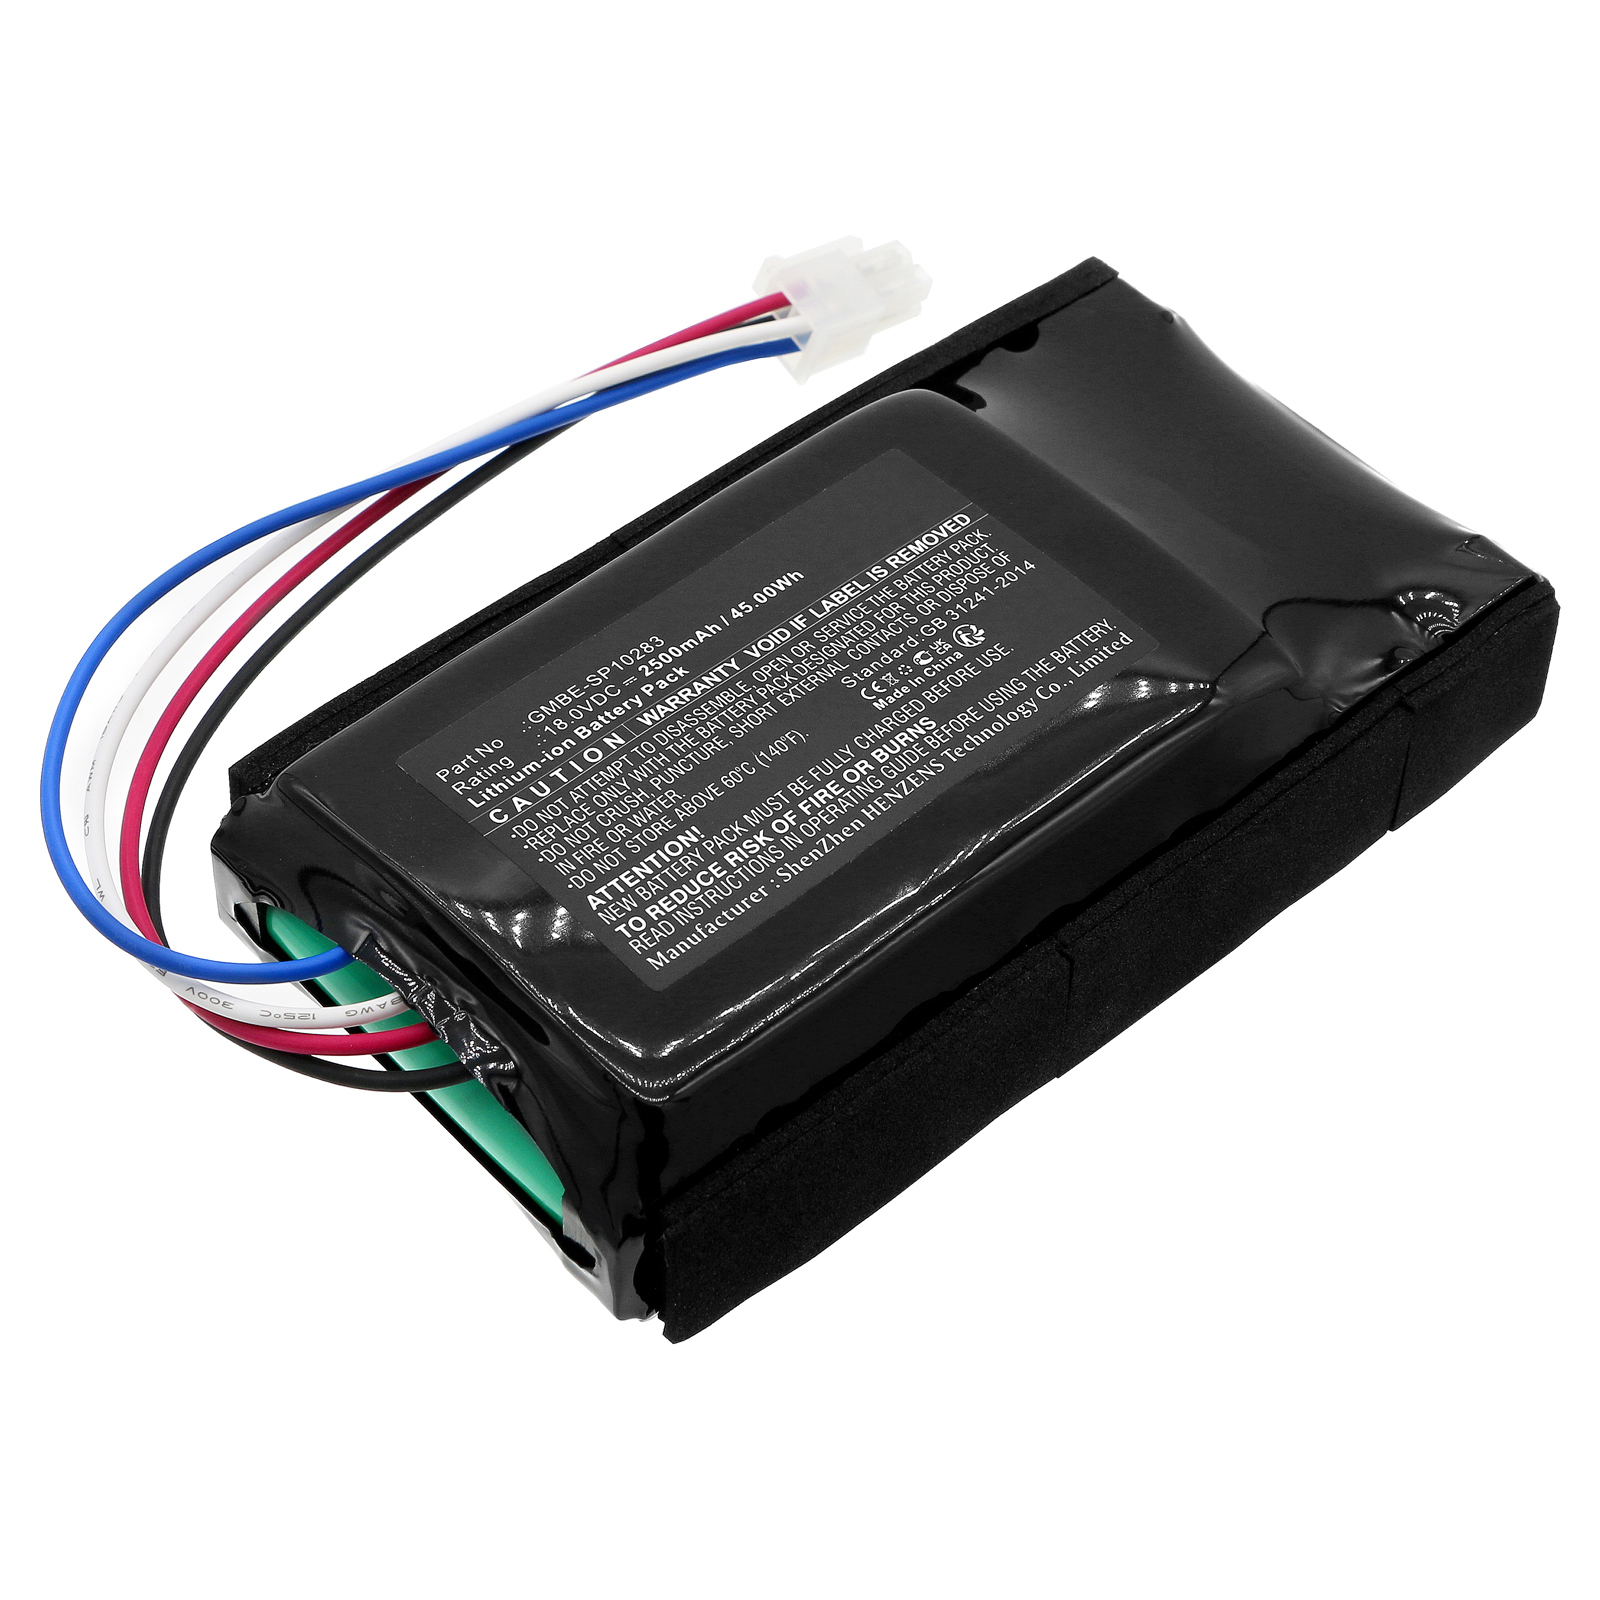 Synergy Digital Lawn Mower Battery, Compatible with Yard Force GMBE-SP11571 Lawn Mower Battery (Li-ion, 18V, 2500mAh)